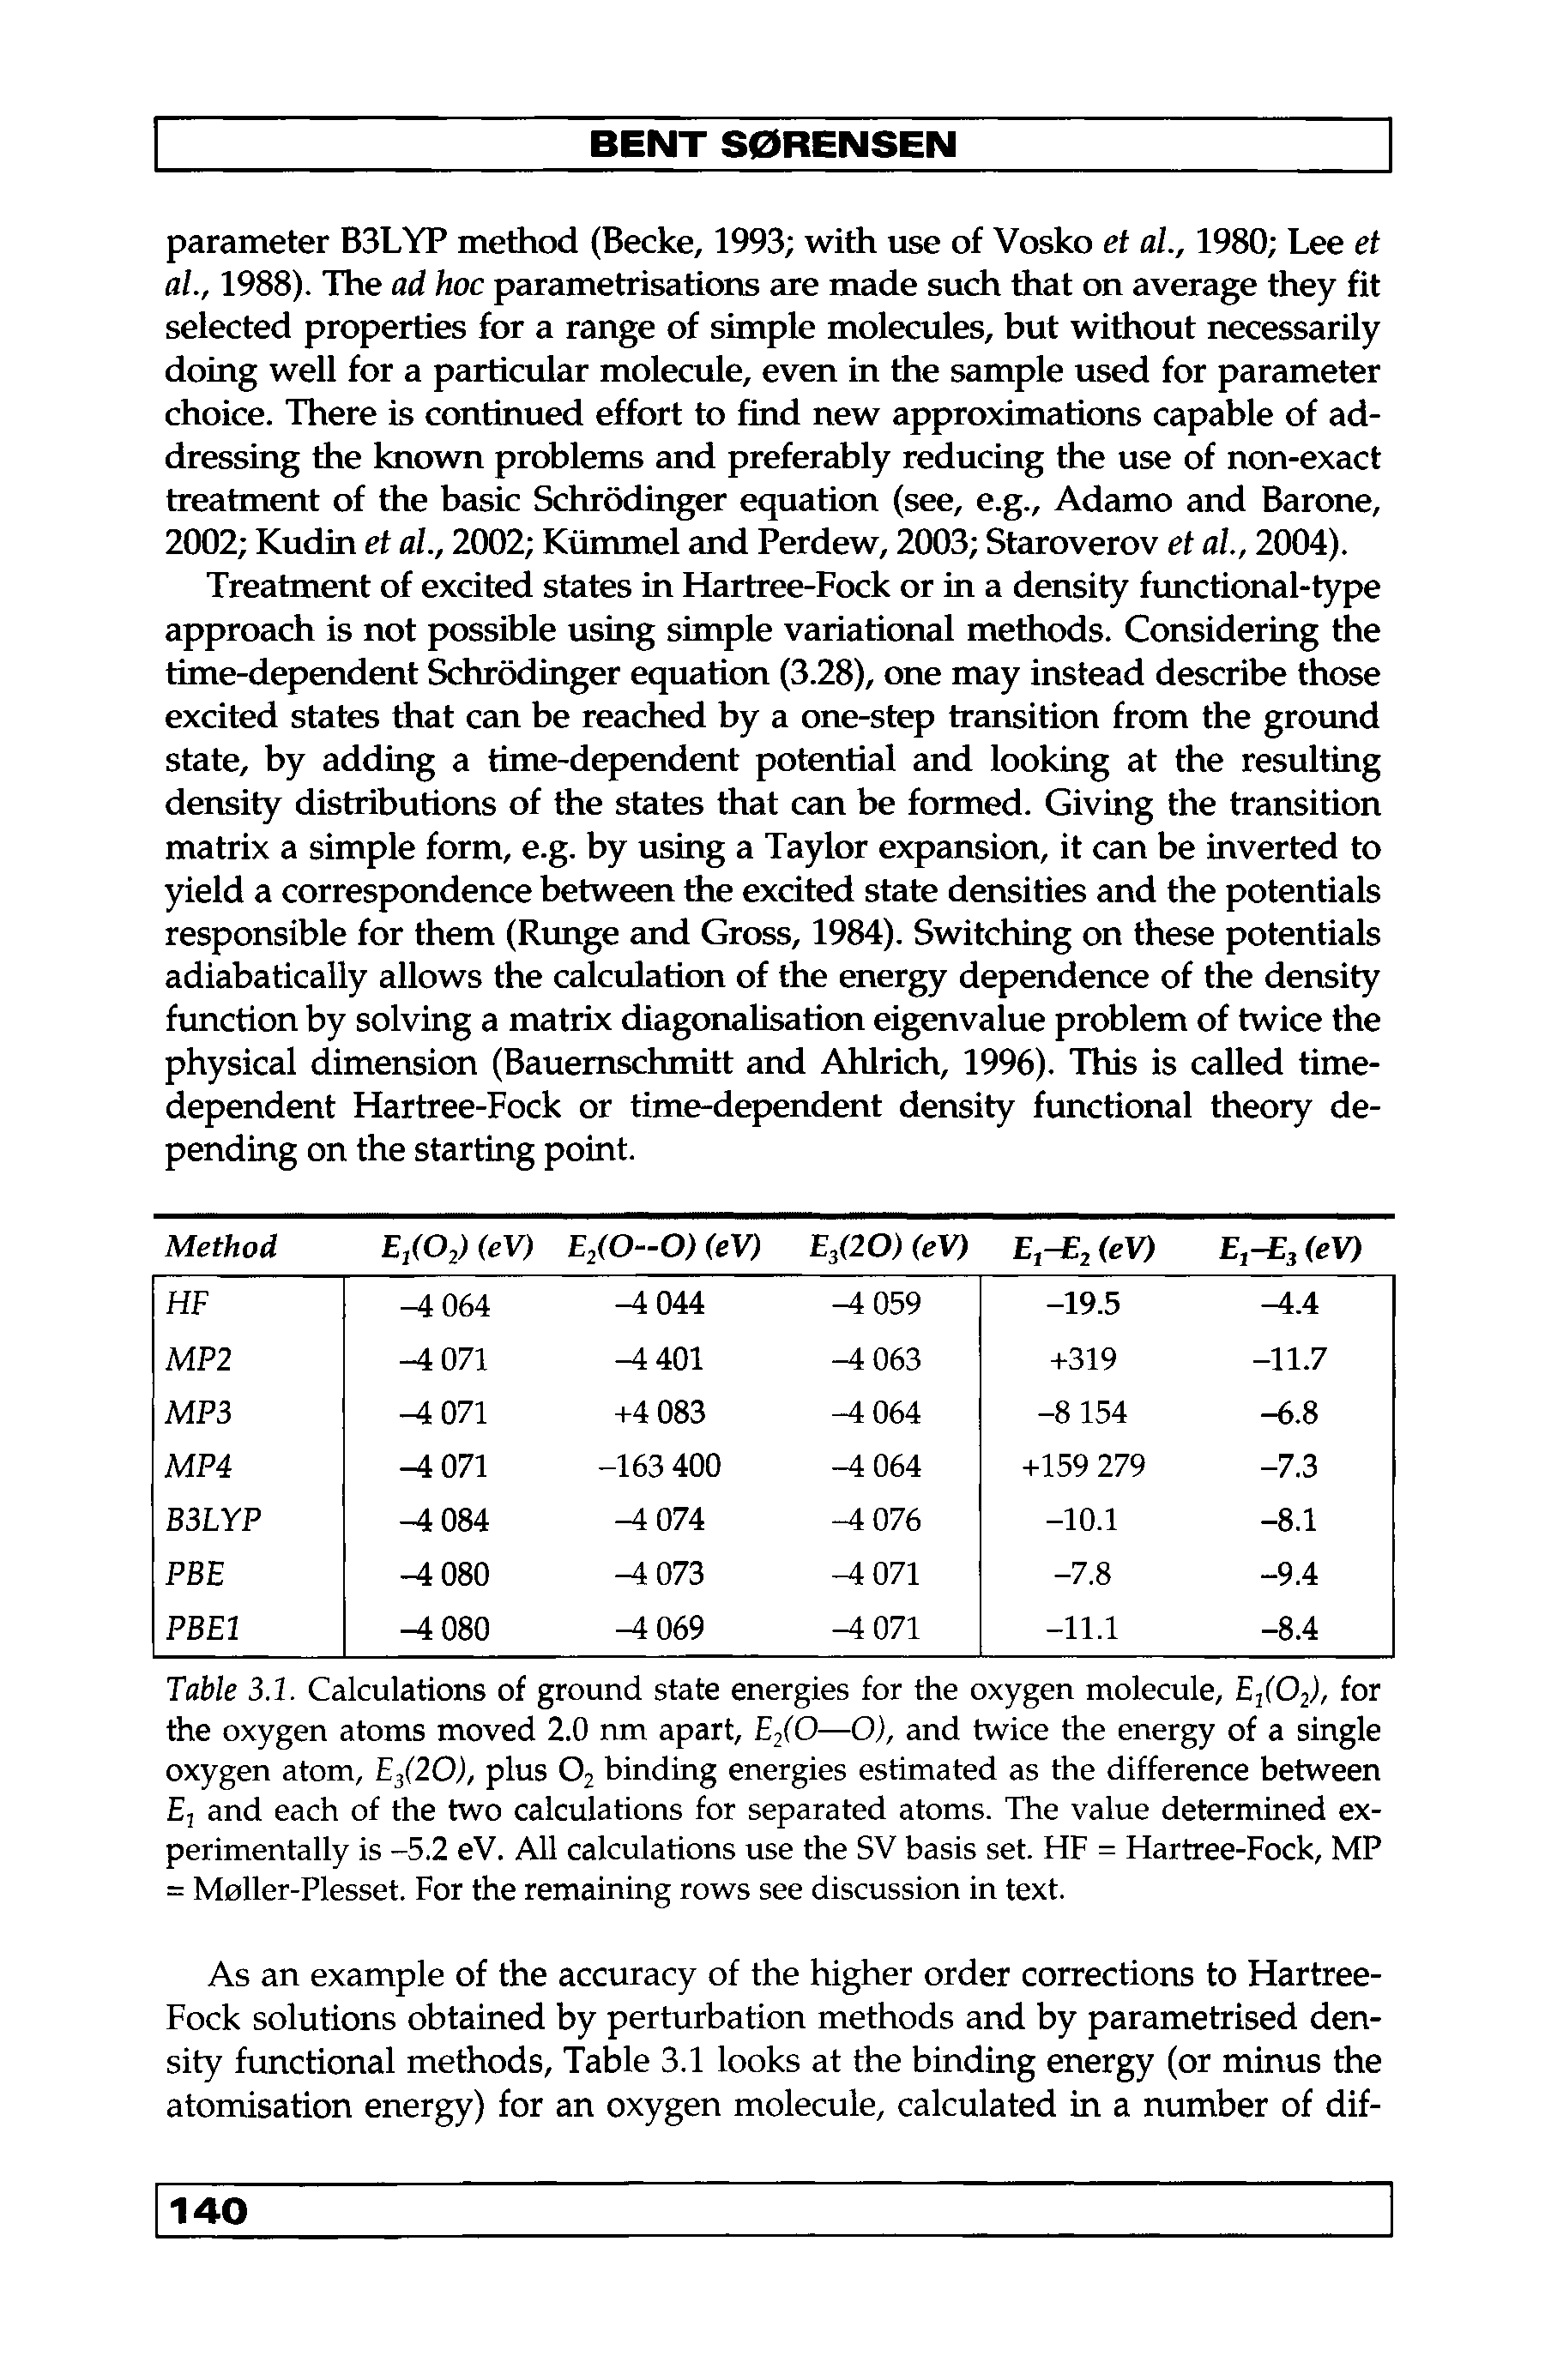 Table 3.1. Calculations of ground state energies for the oxygen molecule, E/Oj), for the oxygen atoms moved 2.0 nm apart, EjfO—O), and twice the energy of a single oxygen atom, E/20), plus O2 binding energies estimated as the difference between E, and each of the two calculations for separated atoms. The value determined experimentally is -5.2 eV. All calculations use the SV basis set. HF = Hartree-Fock, MP = Moller-Plesset. For the remaining rows see discussion in text.